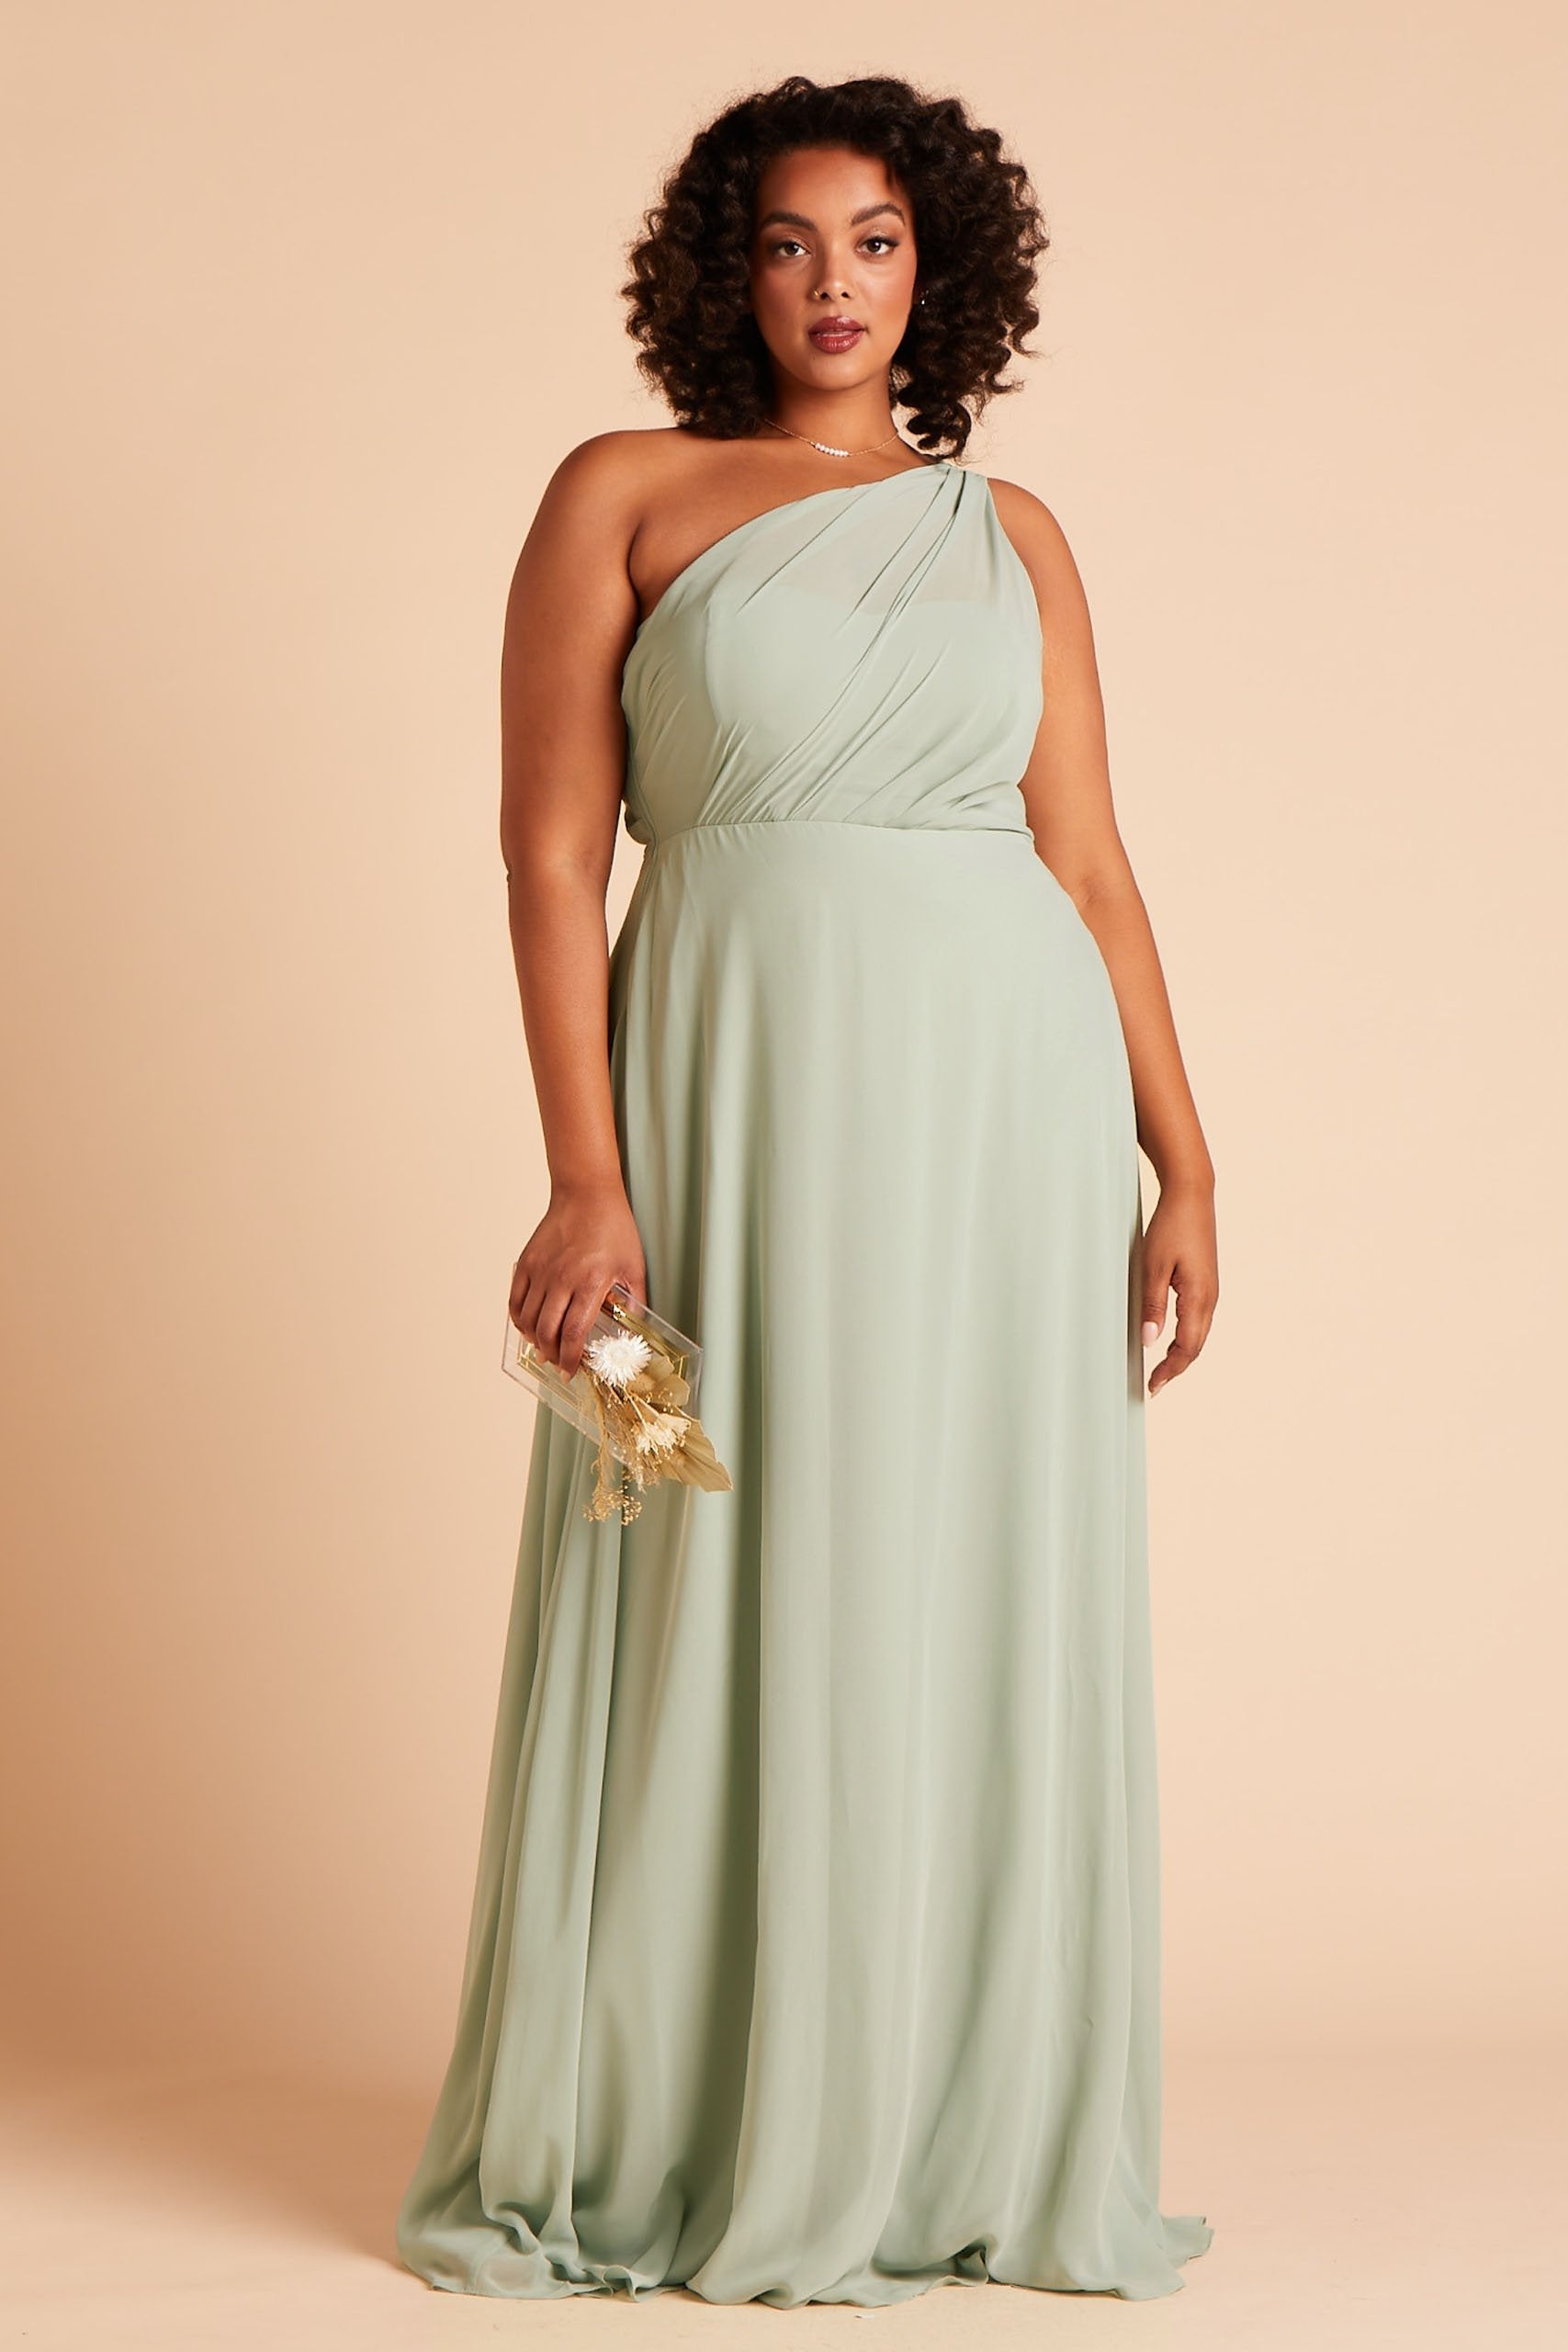 Front view of the Kira Dress Curve in sage chiffon without the optional slit shows a full-figured model with a medium skin tone holding the Clear Clutch with Clear Beads purse at their side.